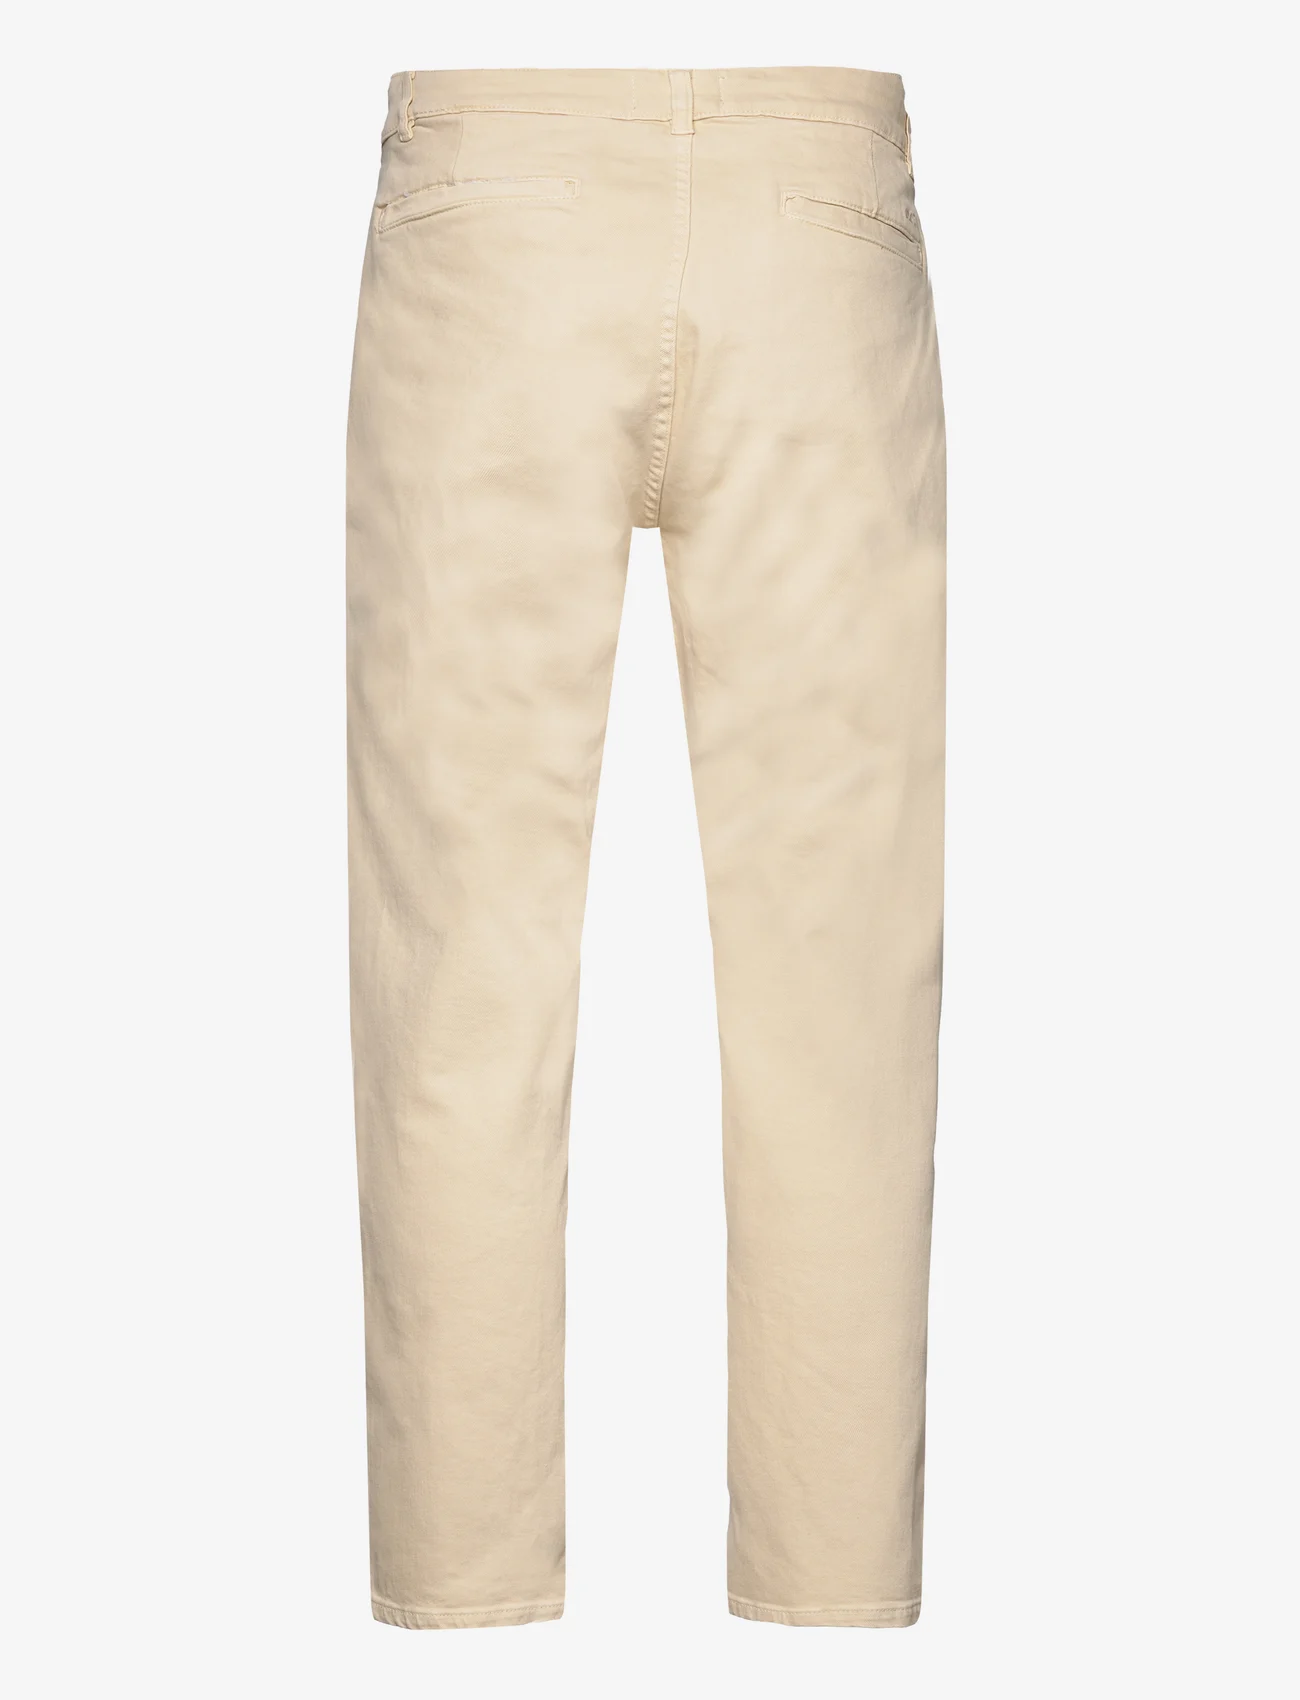 Denim project - DPChino Recycled Pants - chinosy - bleached sand - 1